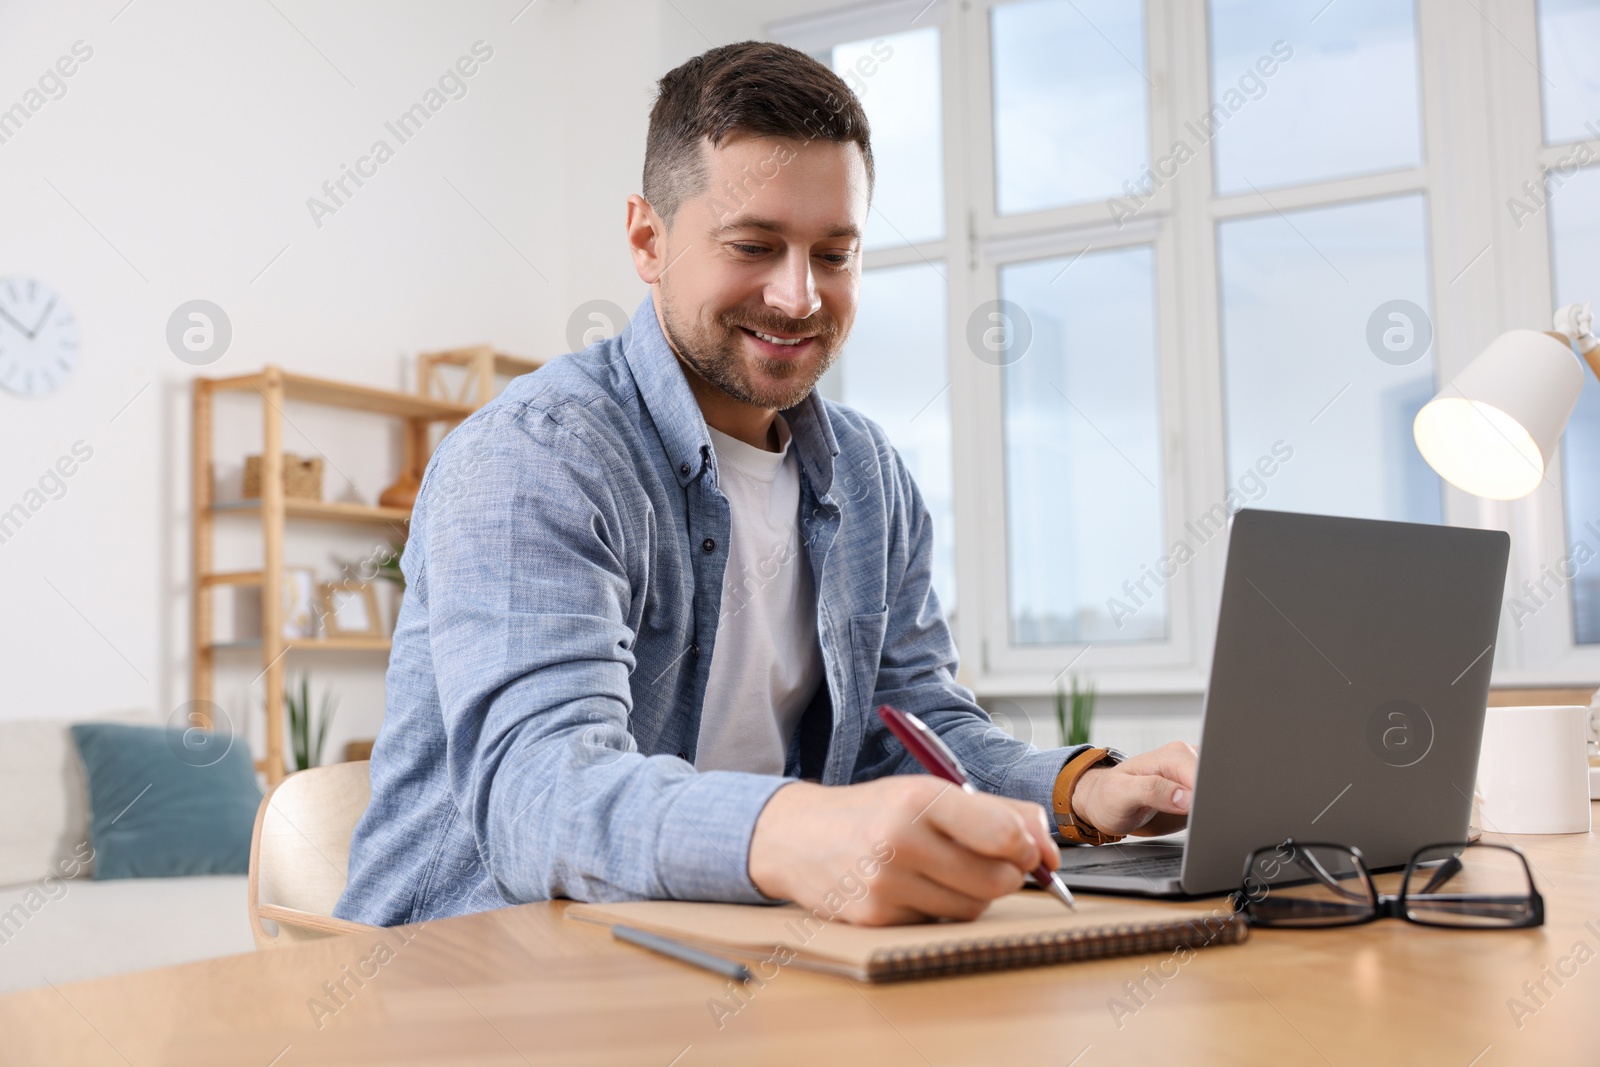 Photo of Happy man writing notes while working on laptop at wooden desk in room